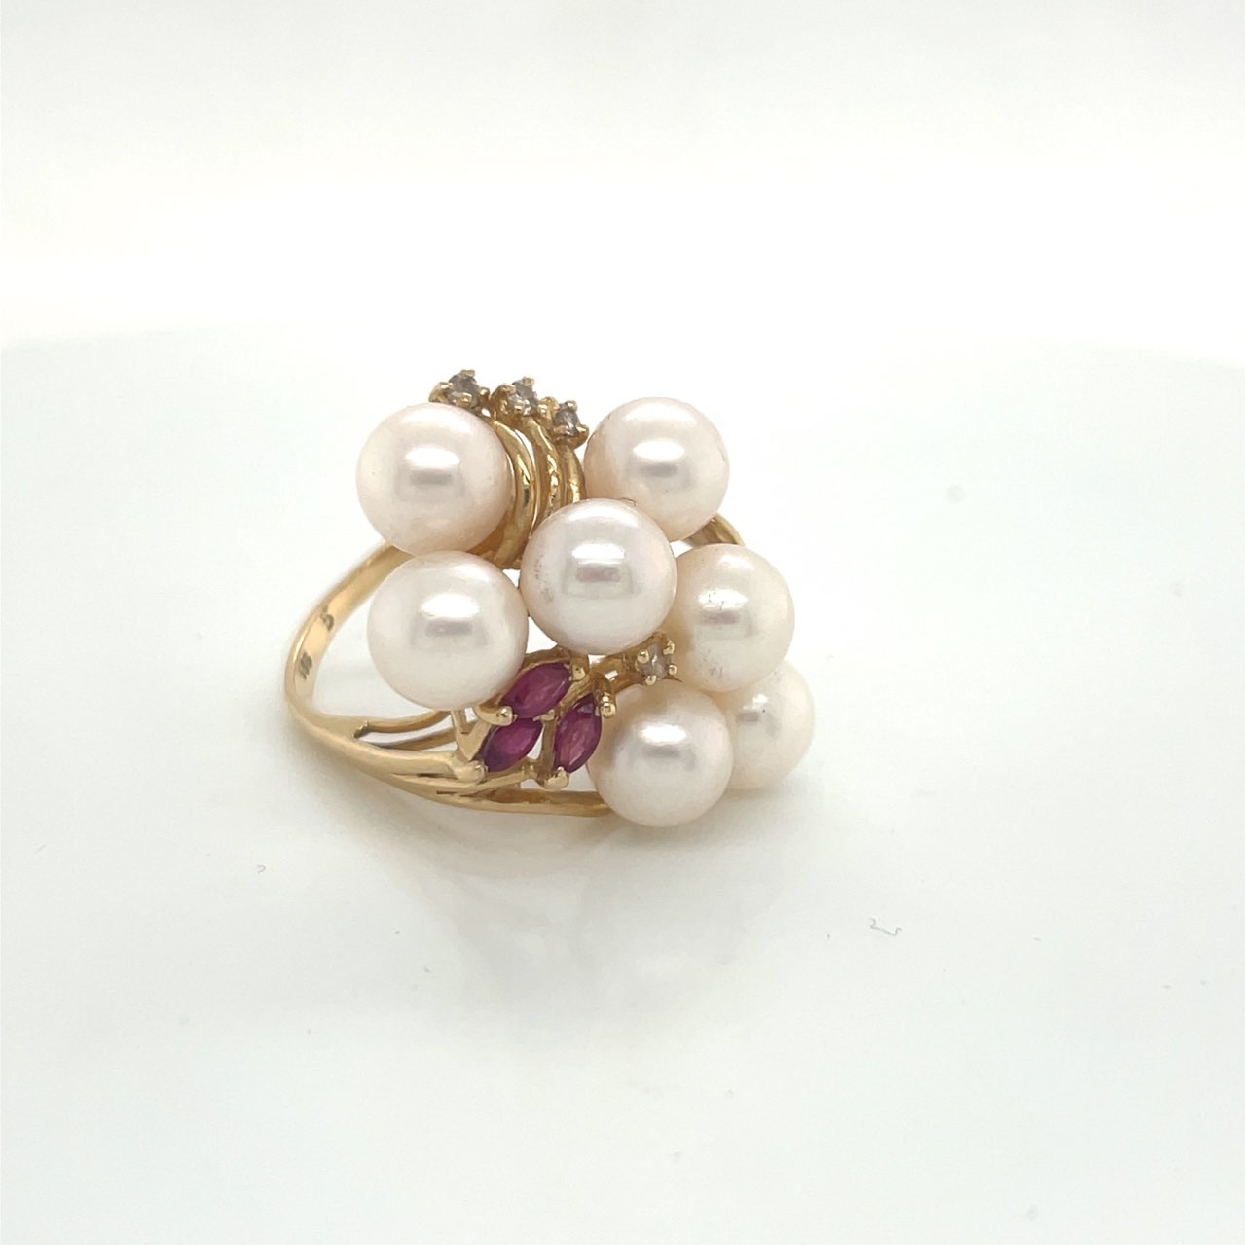 14K Yellow Gold Pearl Cluster Ring with Ruby and Diamond Accents
Size: 6.75
